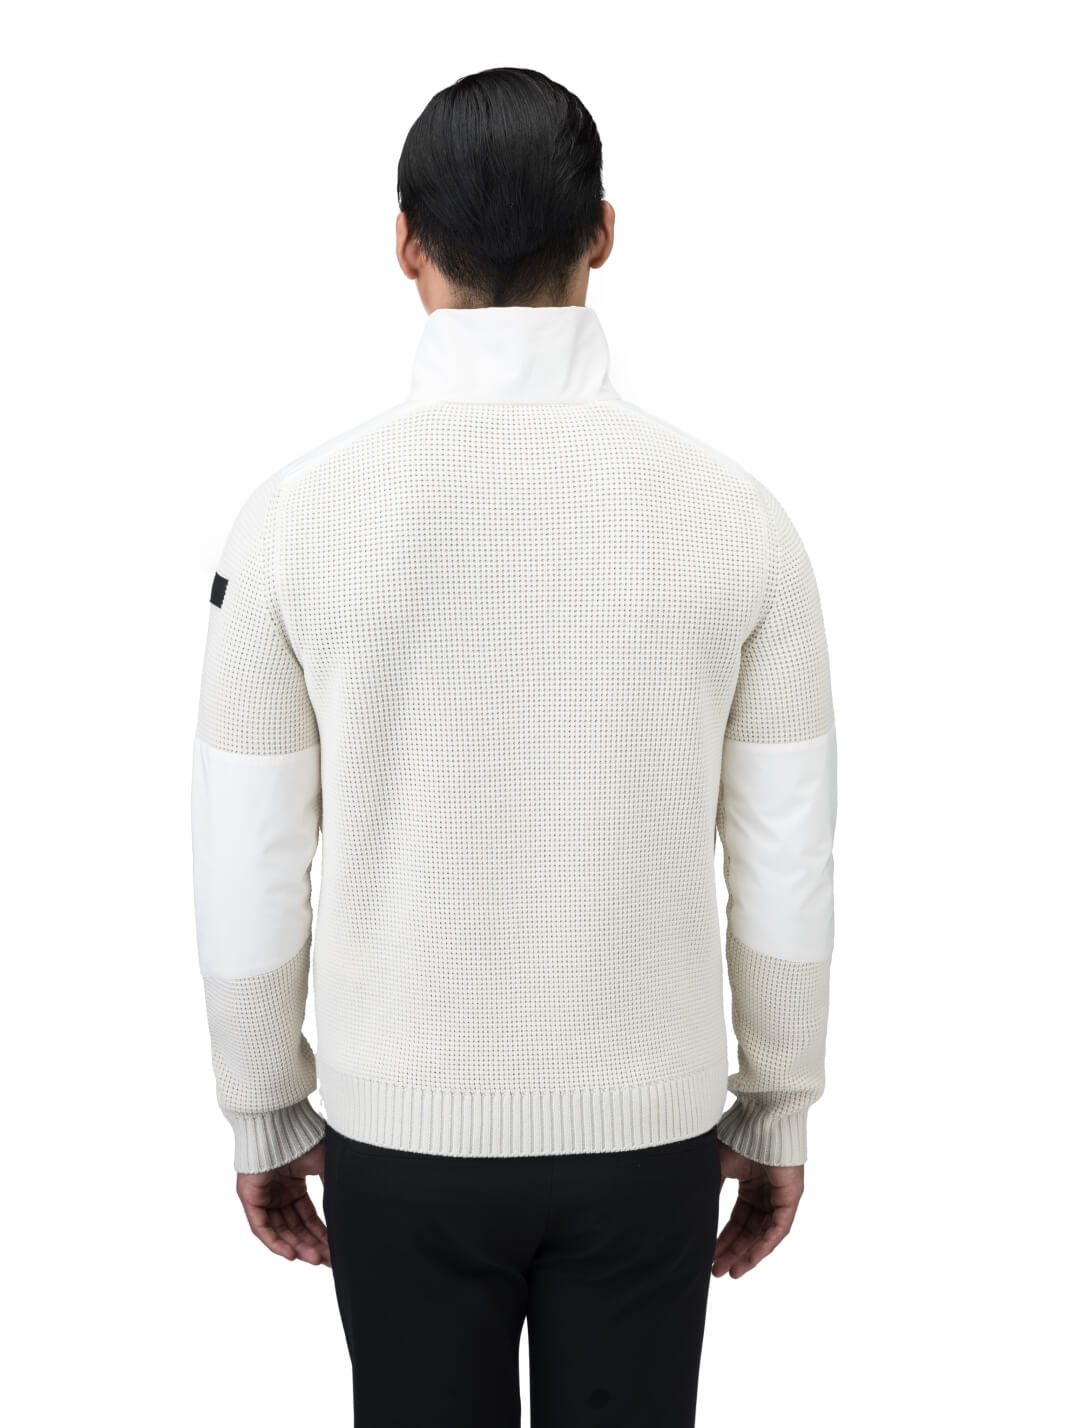 Wai Men's Performance Half Zip Sweater in hip length, 3-Ply Micro Denier and Merino wool knit fabrication, Primaloft Gold Insulation Active+, centre front zipper, flap kangaroo pocket with magnetic closure, and hidden side-entry zipper pockets at waist, in Chalk